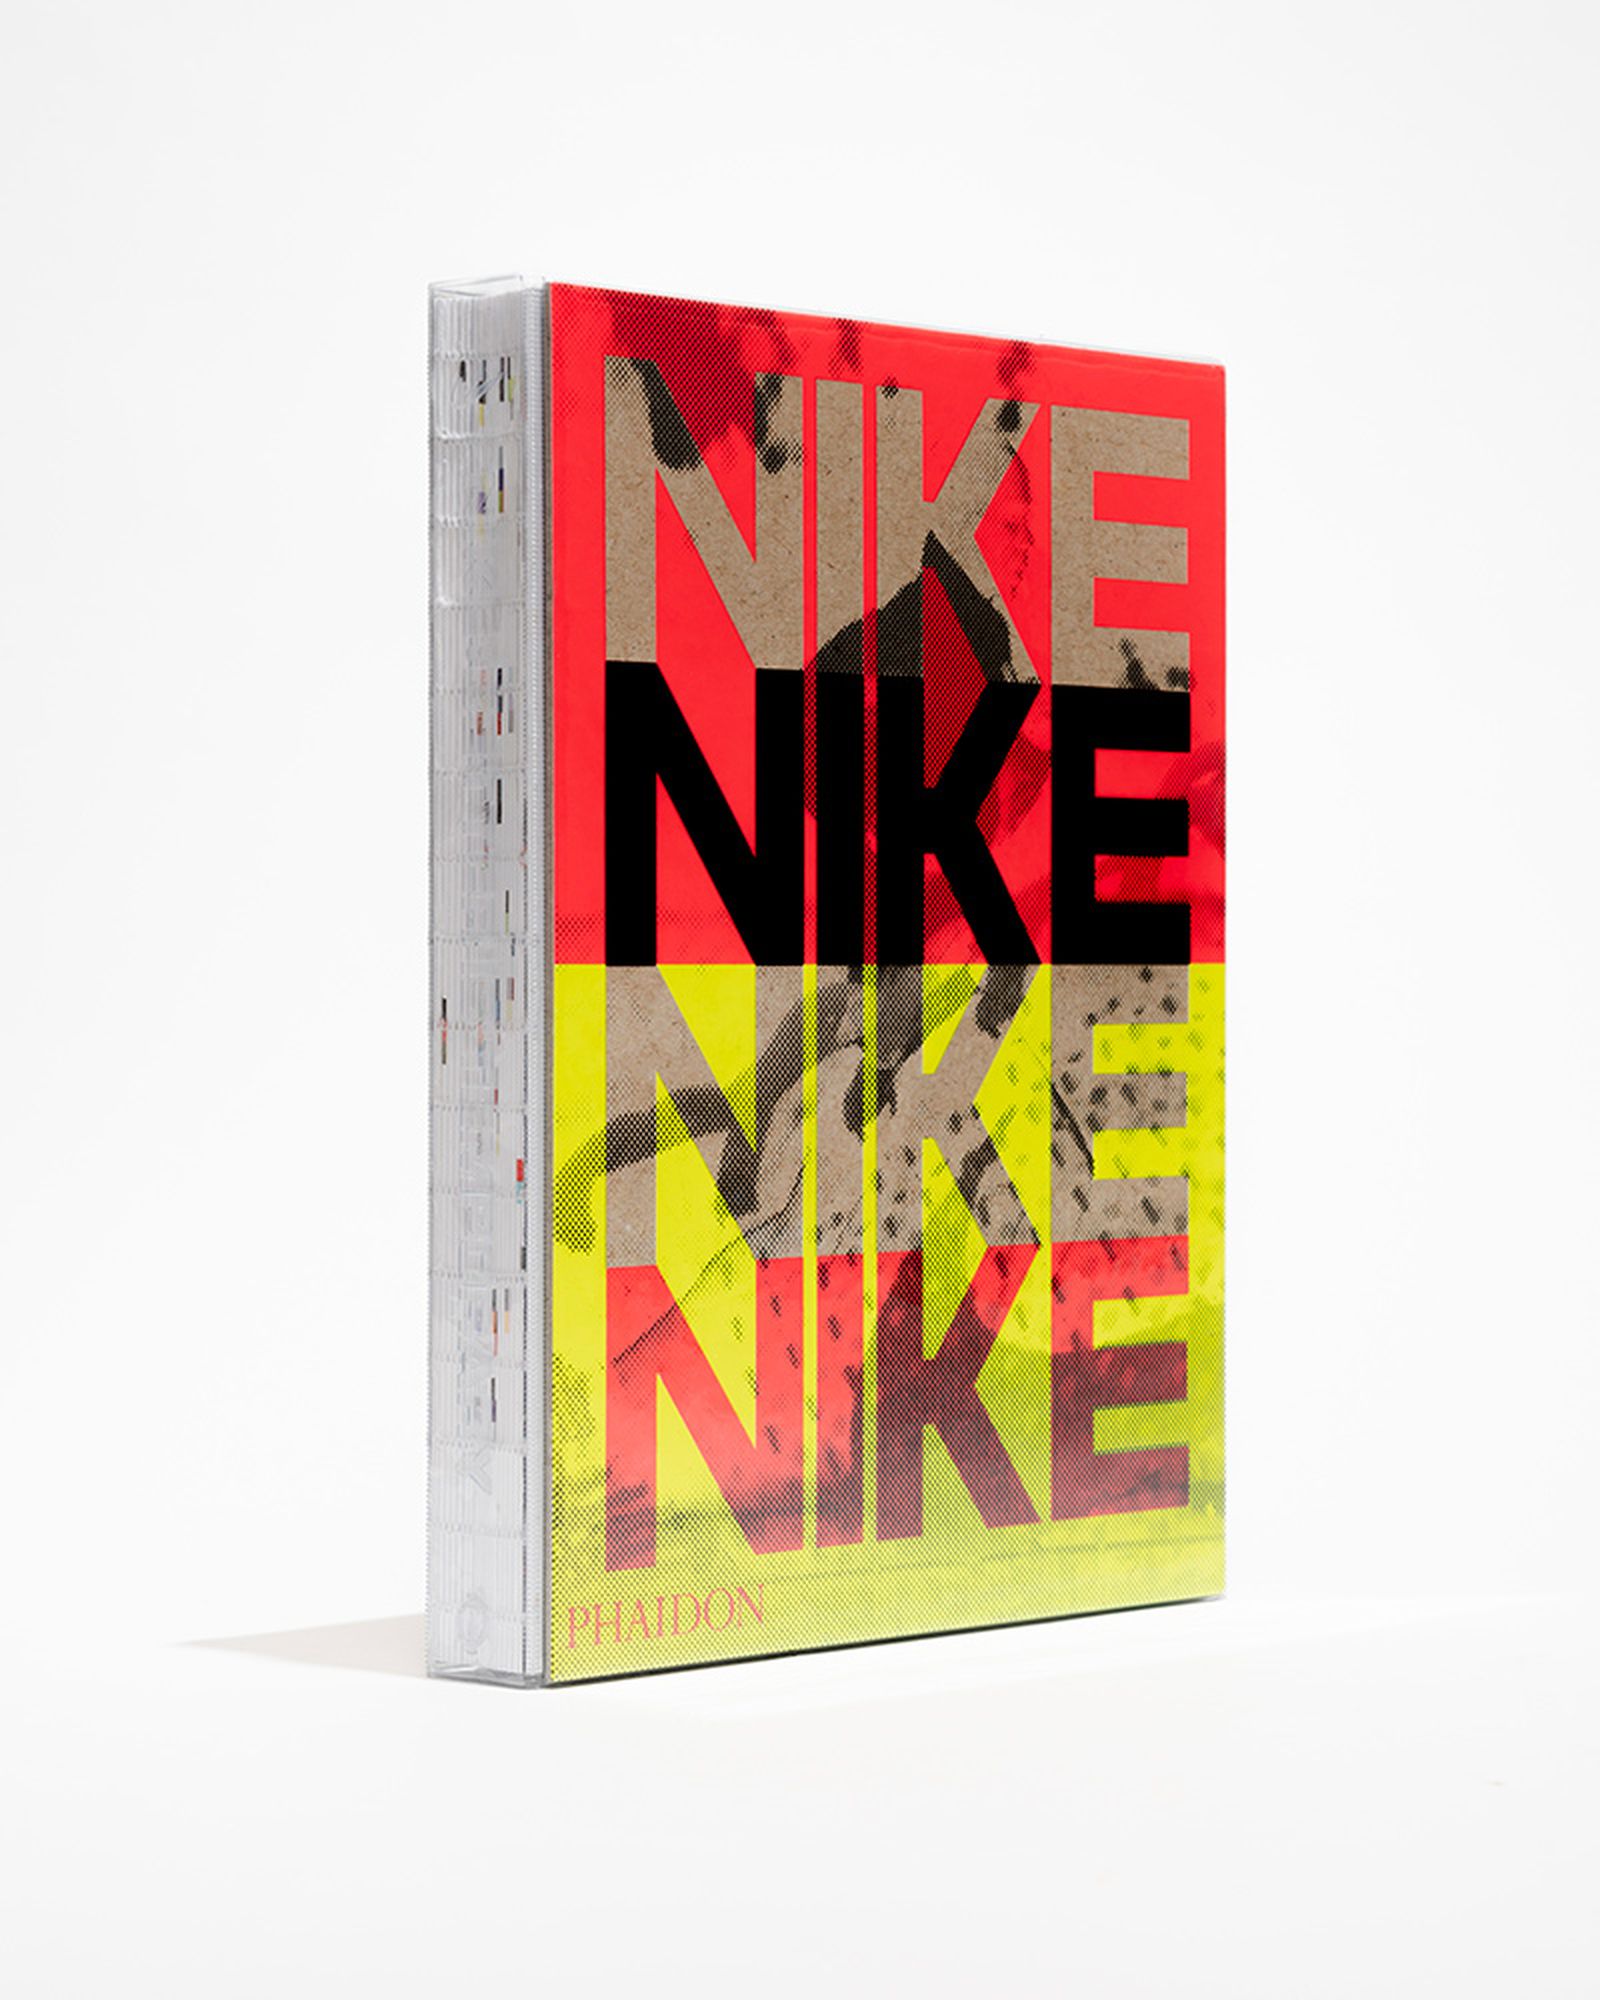 nike-better-is-temporary-book-05